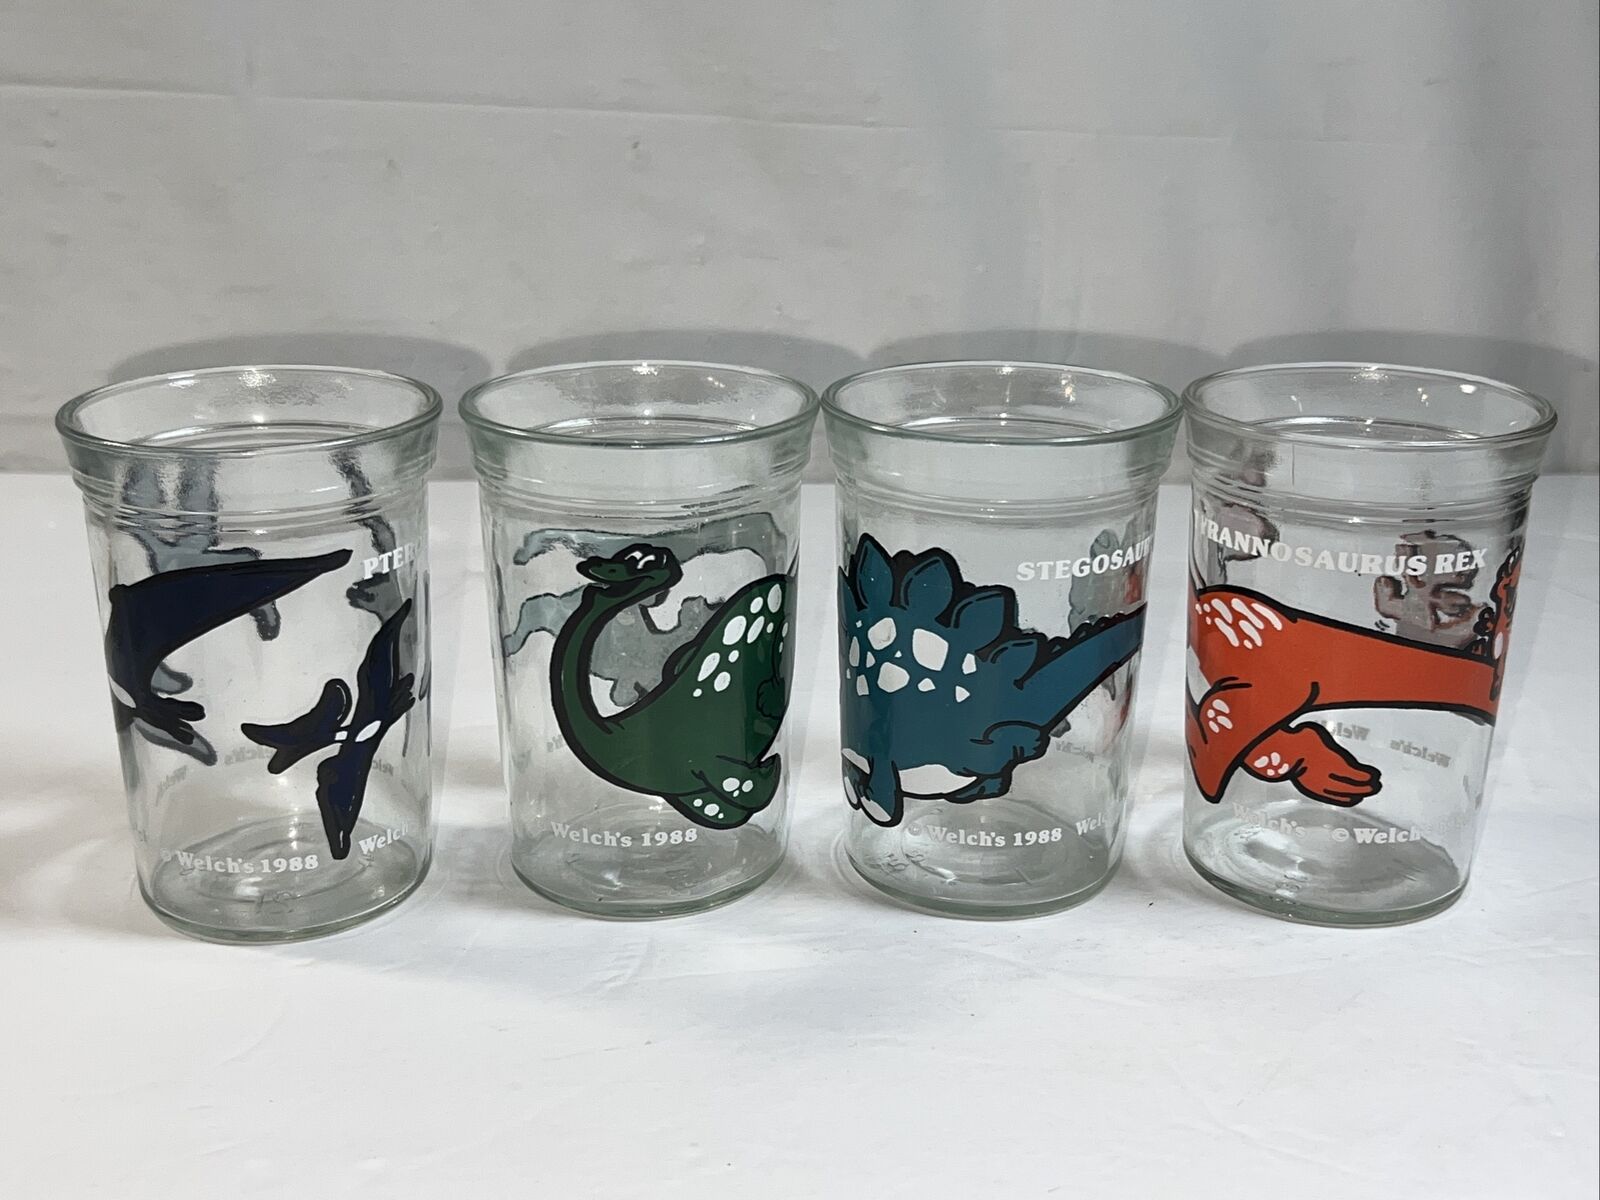 Vintage Welch’s Complete Dated Set Of 4 (1988) Dinosaurs Jelly Jars Never Used